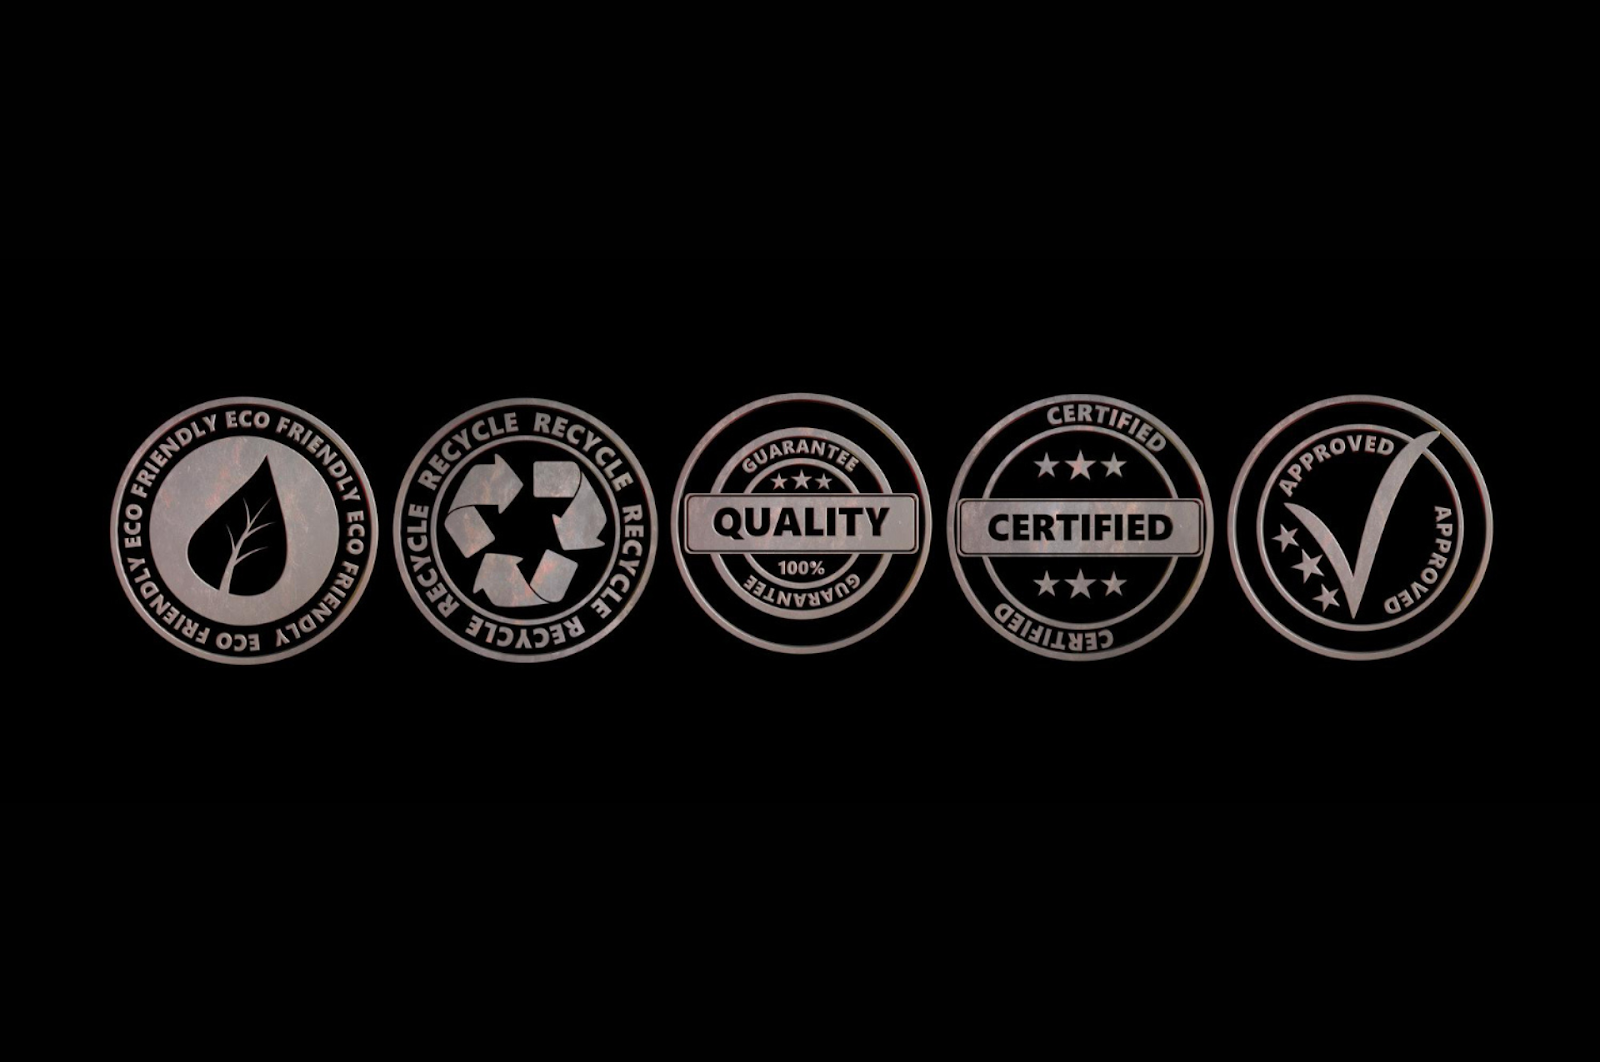 Assortment of e-commerce trust badges signifying quality, eco-friendliness, and secure shopping to increase consumer confidence.